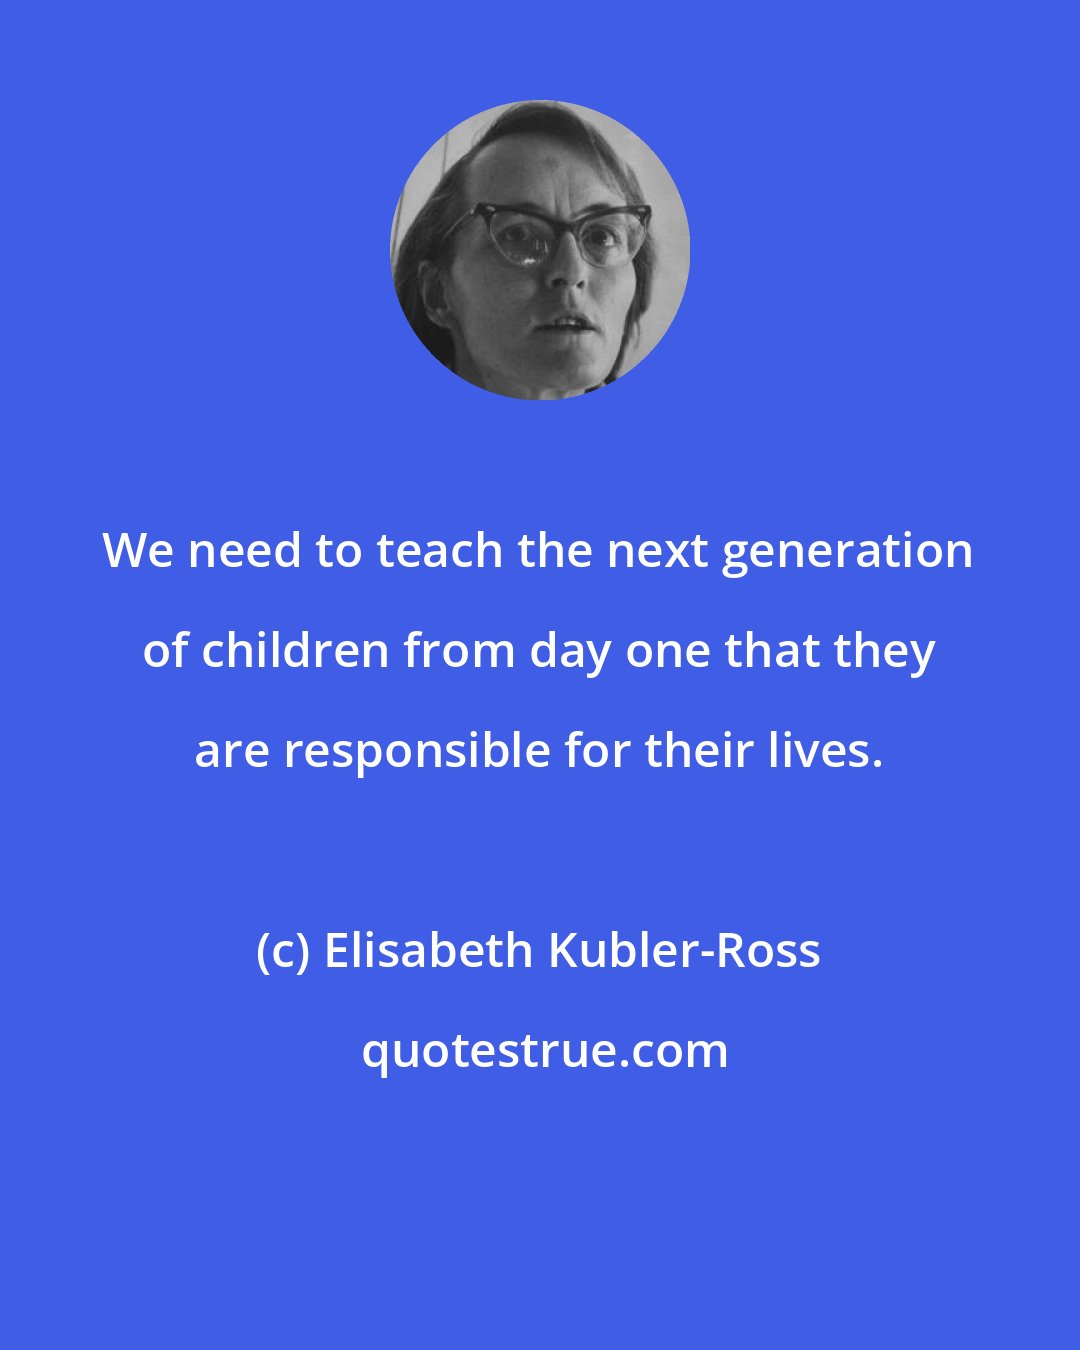 Elisabeth Kubler-Ross: We need to teach the next generation of children from day one that they are responsible for their lives.